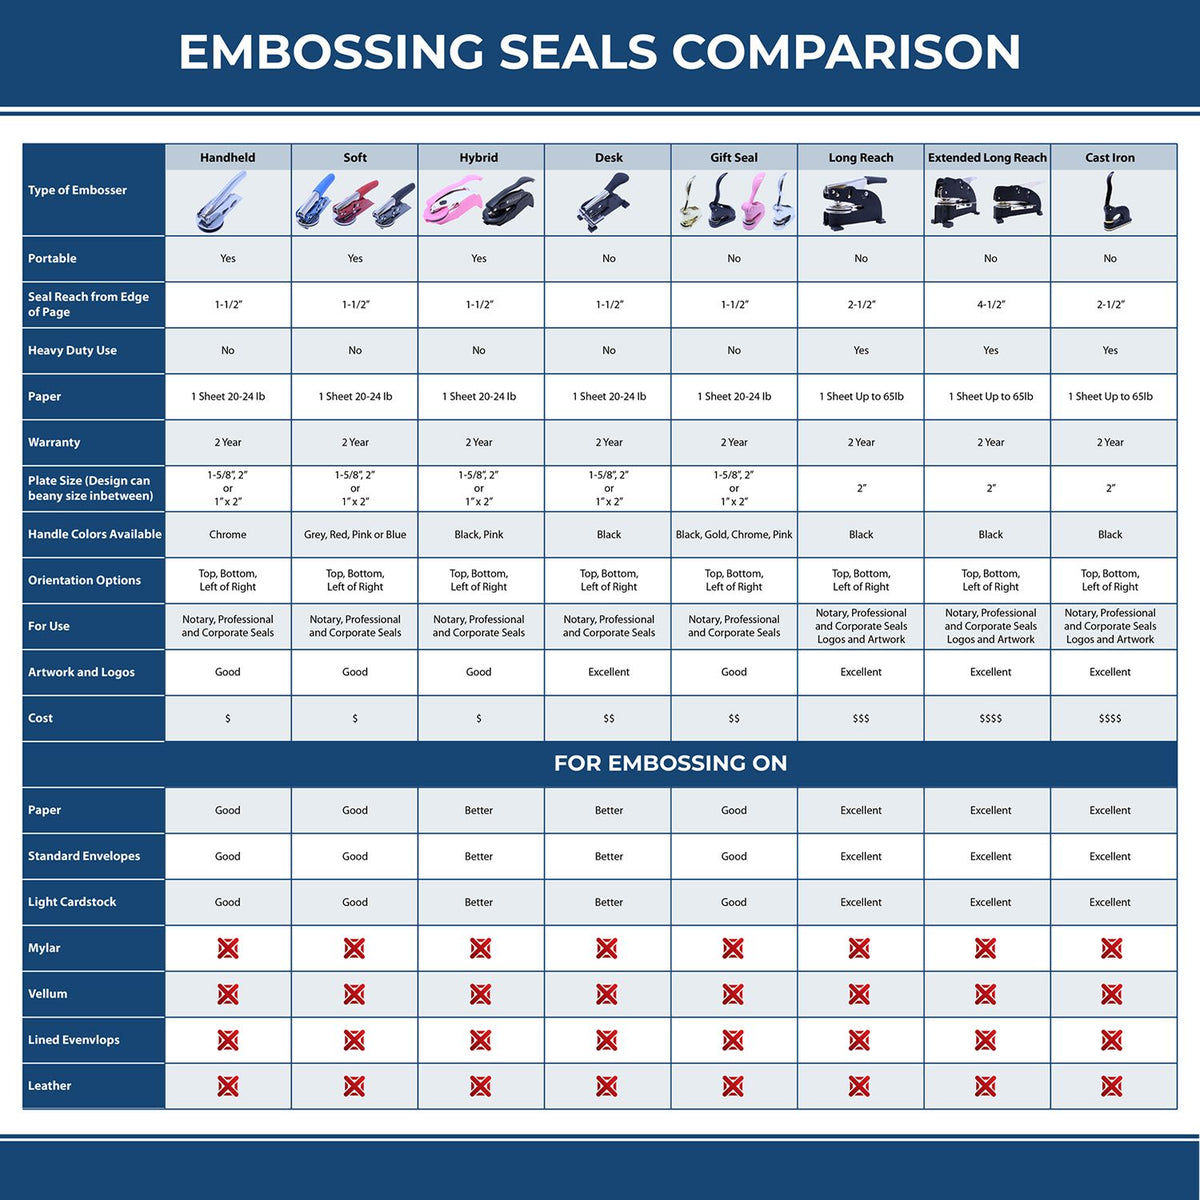 A comparison chart for the different types of mount models available for the State of Indiana Extended Long Reach Geologist Seal